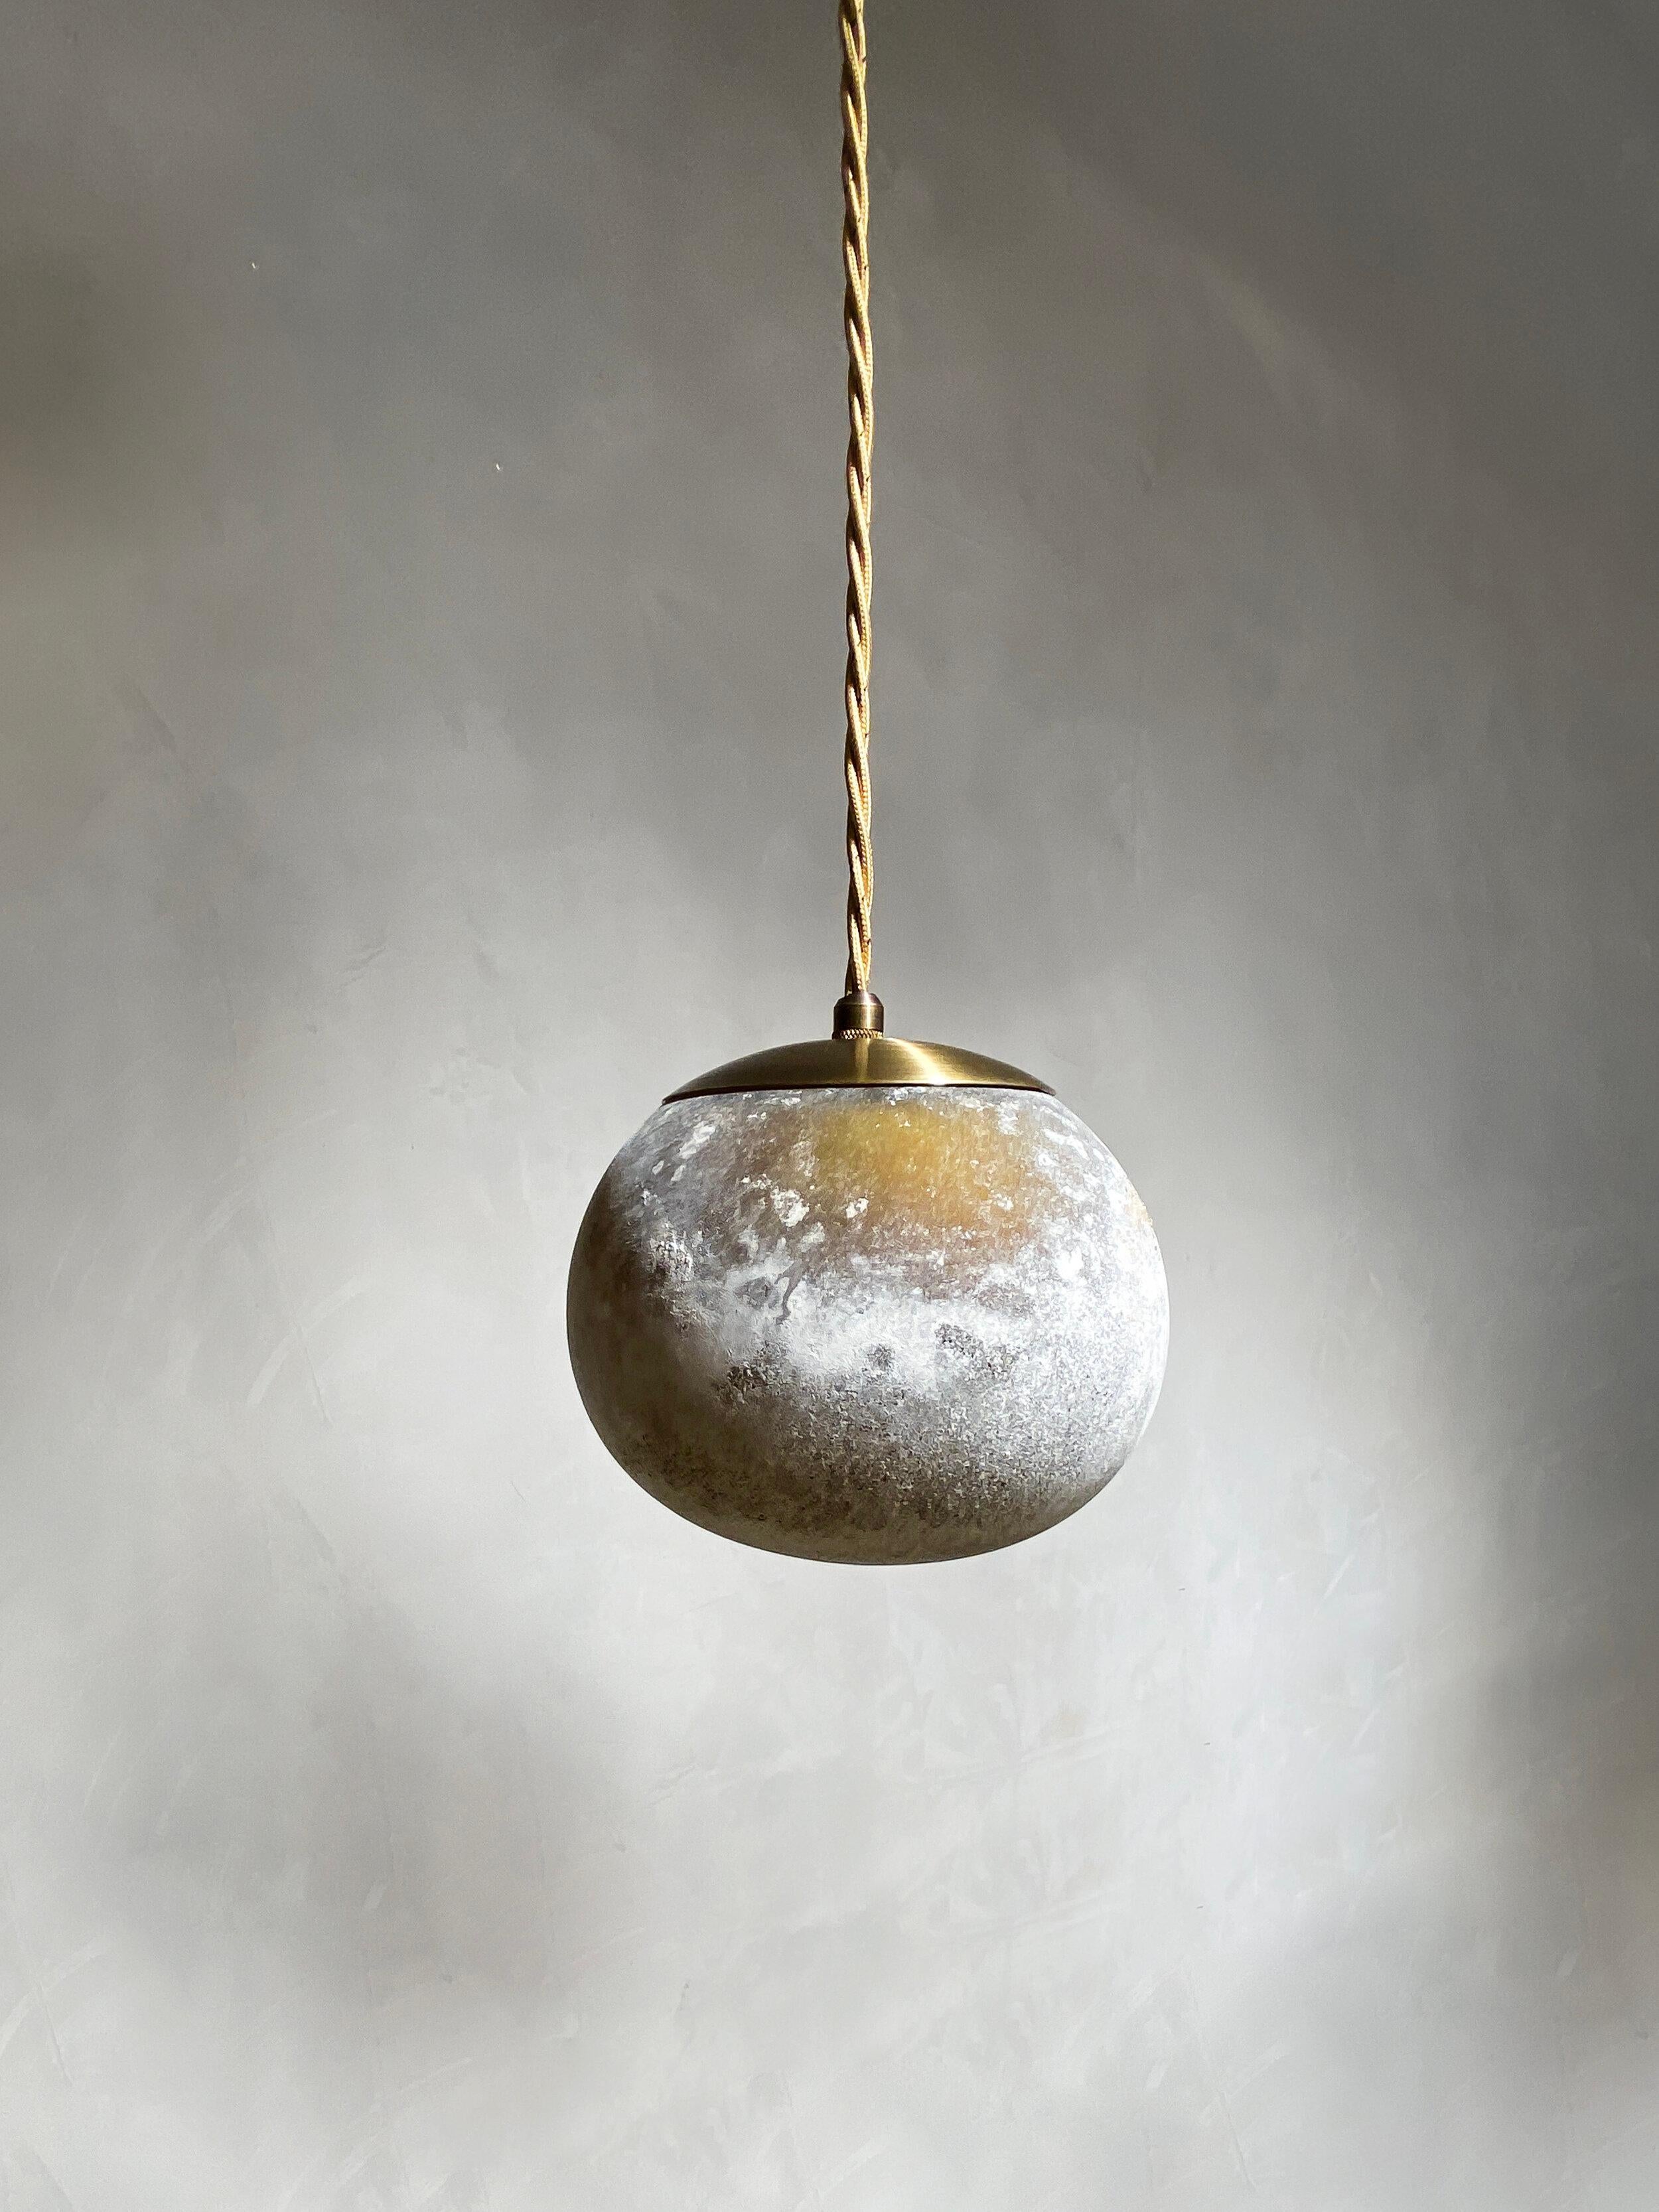 Salty Pendant Ball 20 by Contain
Dimensions: Ø 20 x H 100 cm (custom length).
Materials: Blown glass from local production with salty process and brass structure.

Available in different finishes and dimensions (14 cm Ø / 18 cm Ø / 20 cm Øx (custom